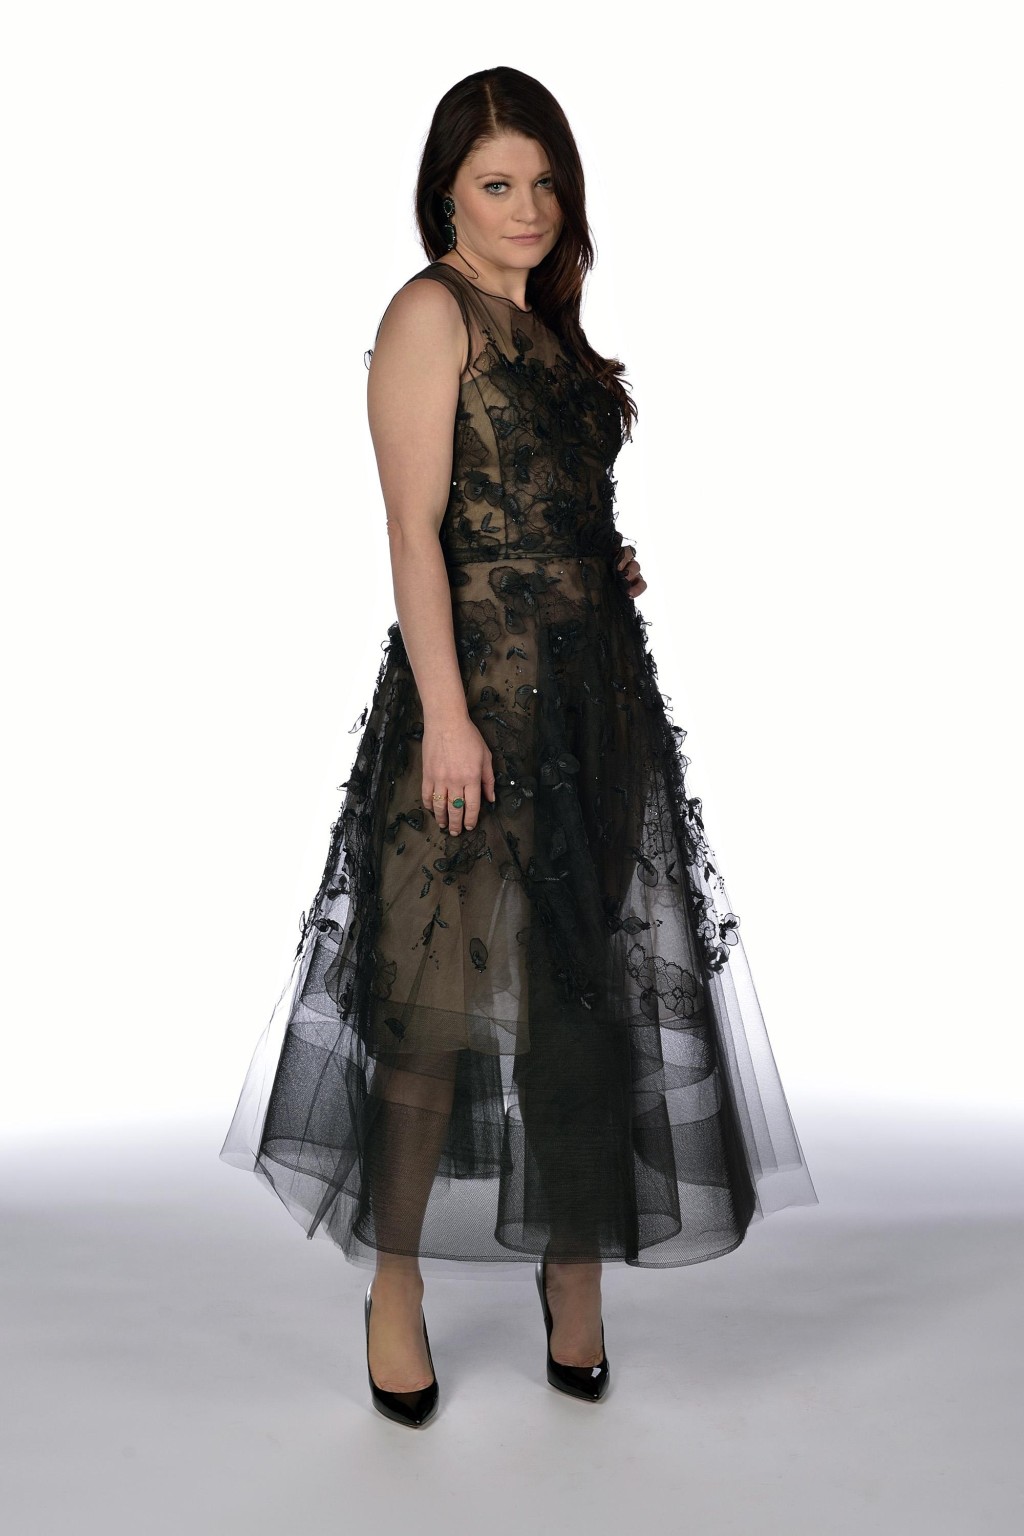 Emilie De Ravin Wearing A Black Lace Dress At Once Upon A Time Season 4 Screenin Porn Pictures